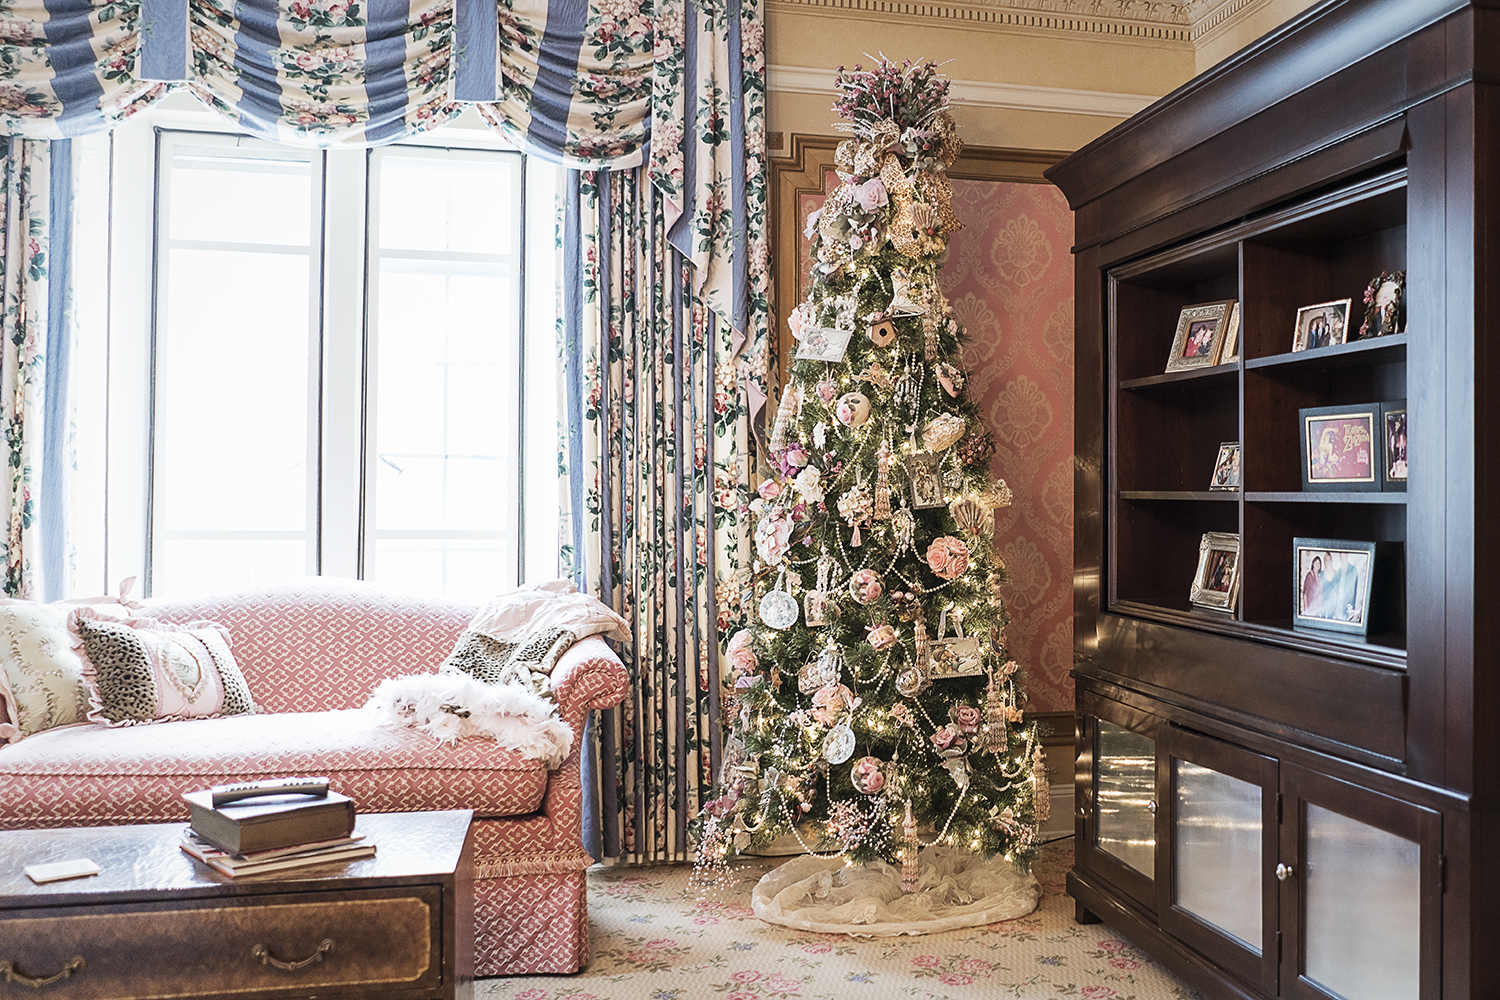 A Victorian-style Christmas tree stands in the corner of the Heddy's bedroom in their home.